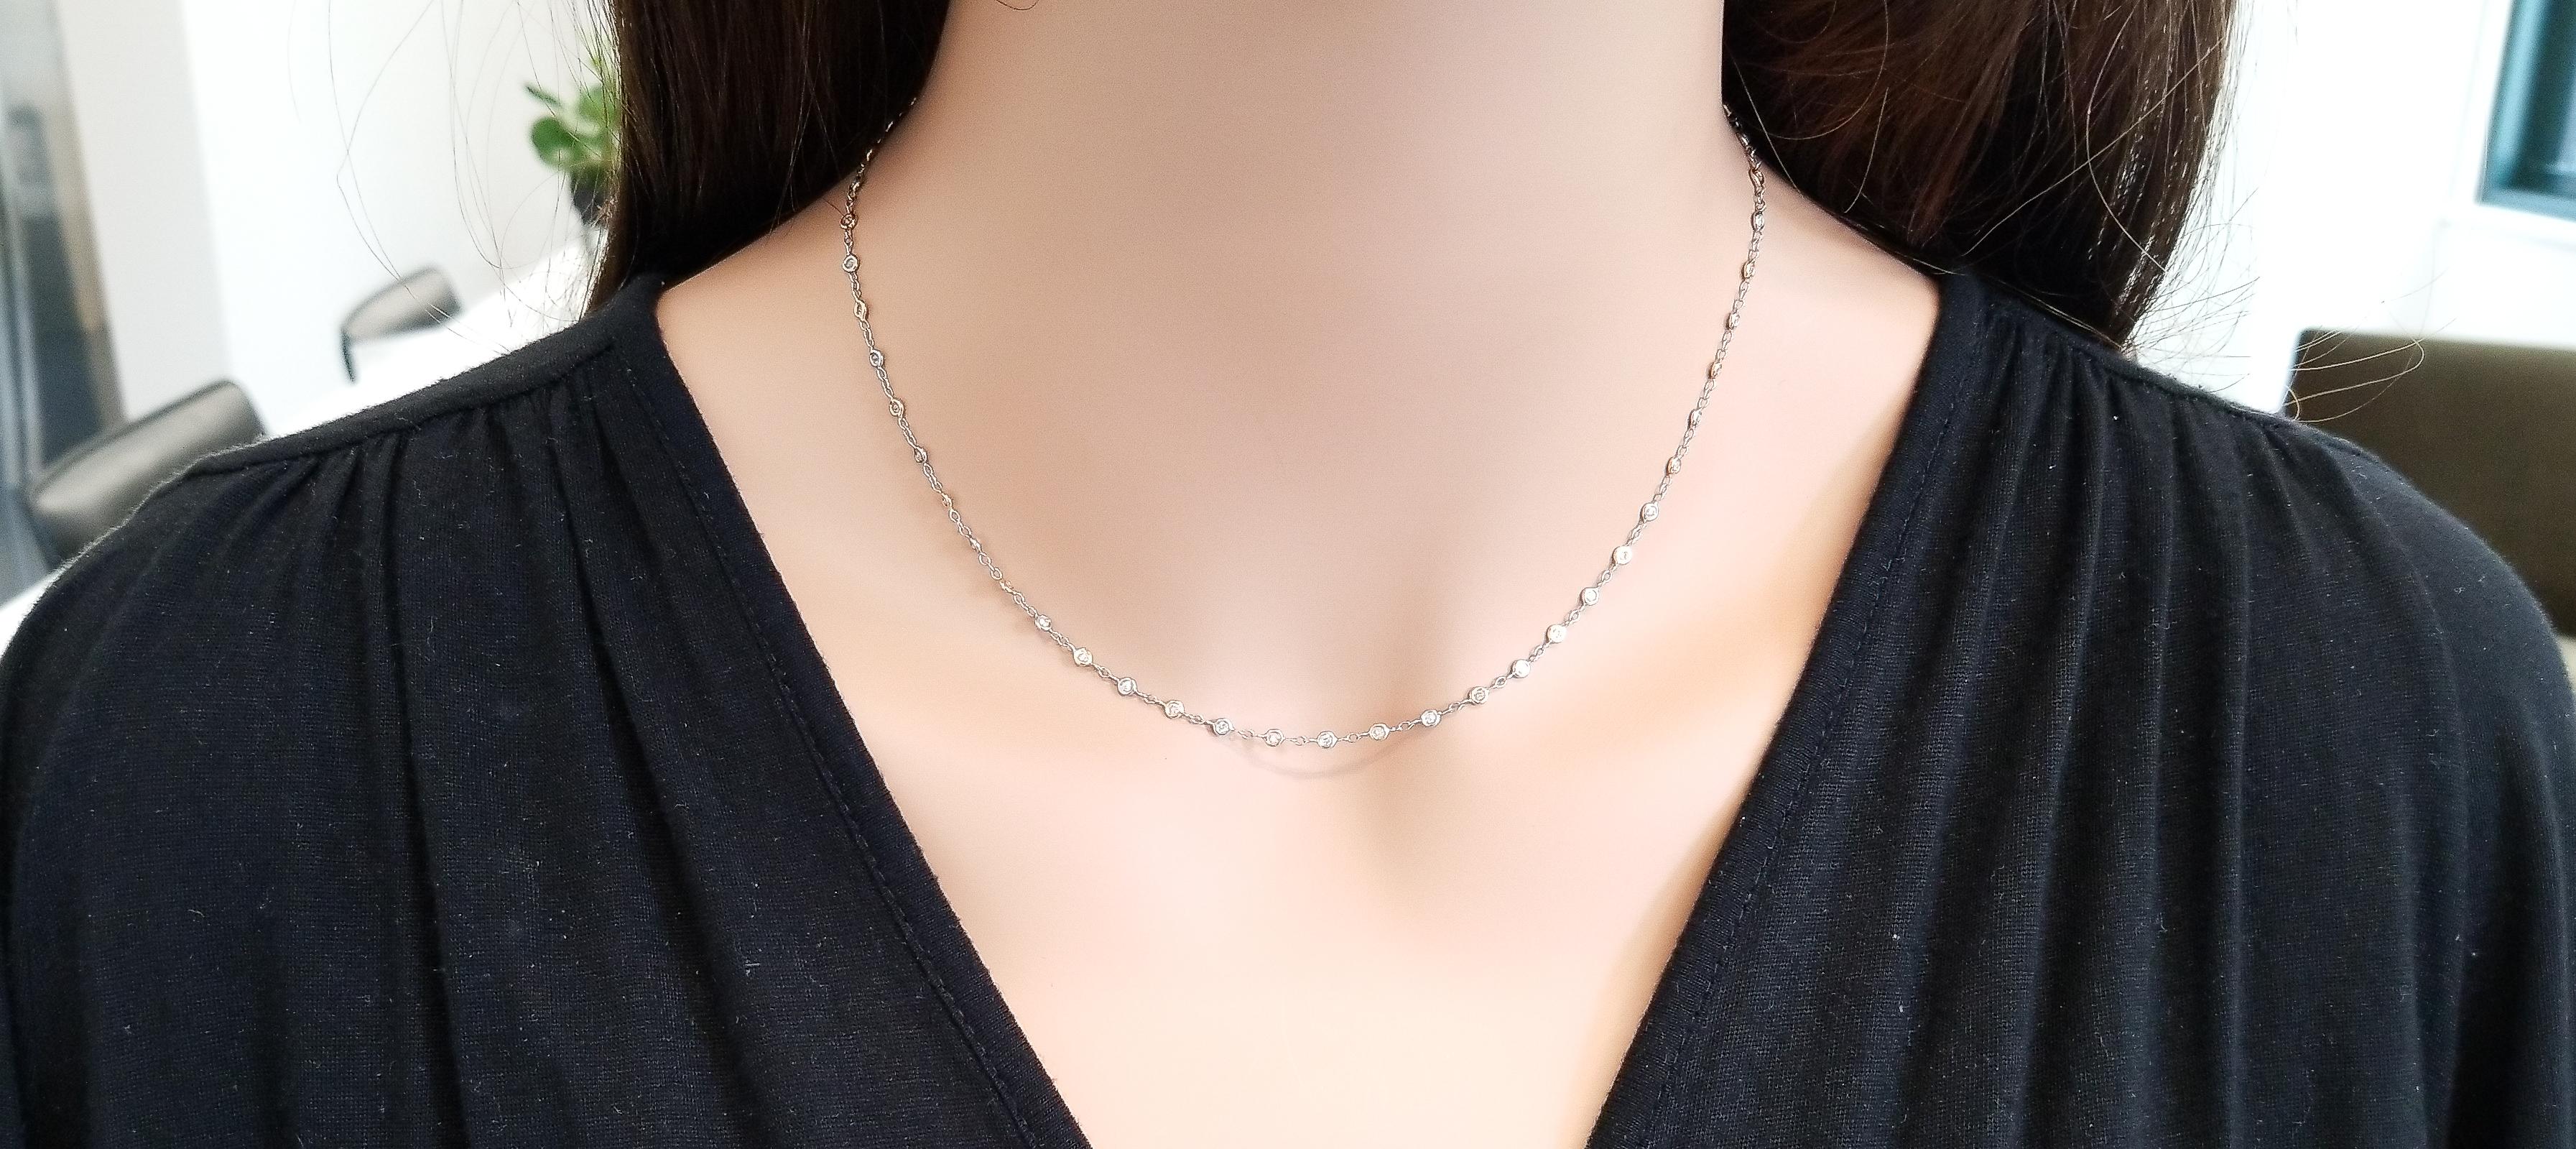 A gorgeous diamond necklace will rarely go overlooked. This 18” piece is both rare and stunning. It includes alternating wire-wrapped bezels that set white and natural pink round diamonds. There are 27 white diamonds that total 0.40 carat total